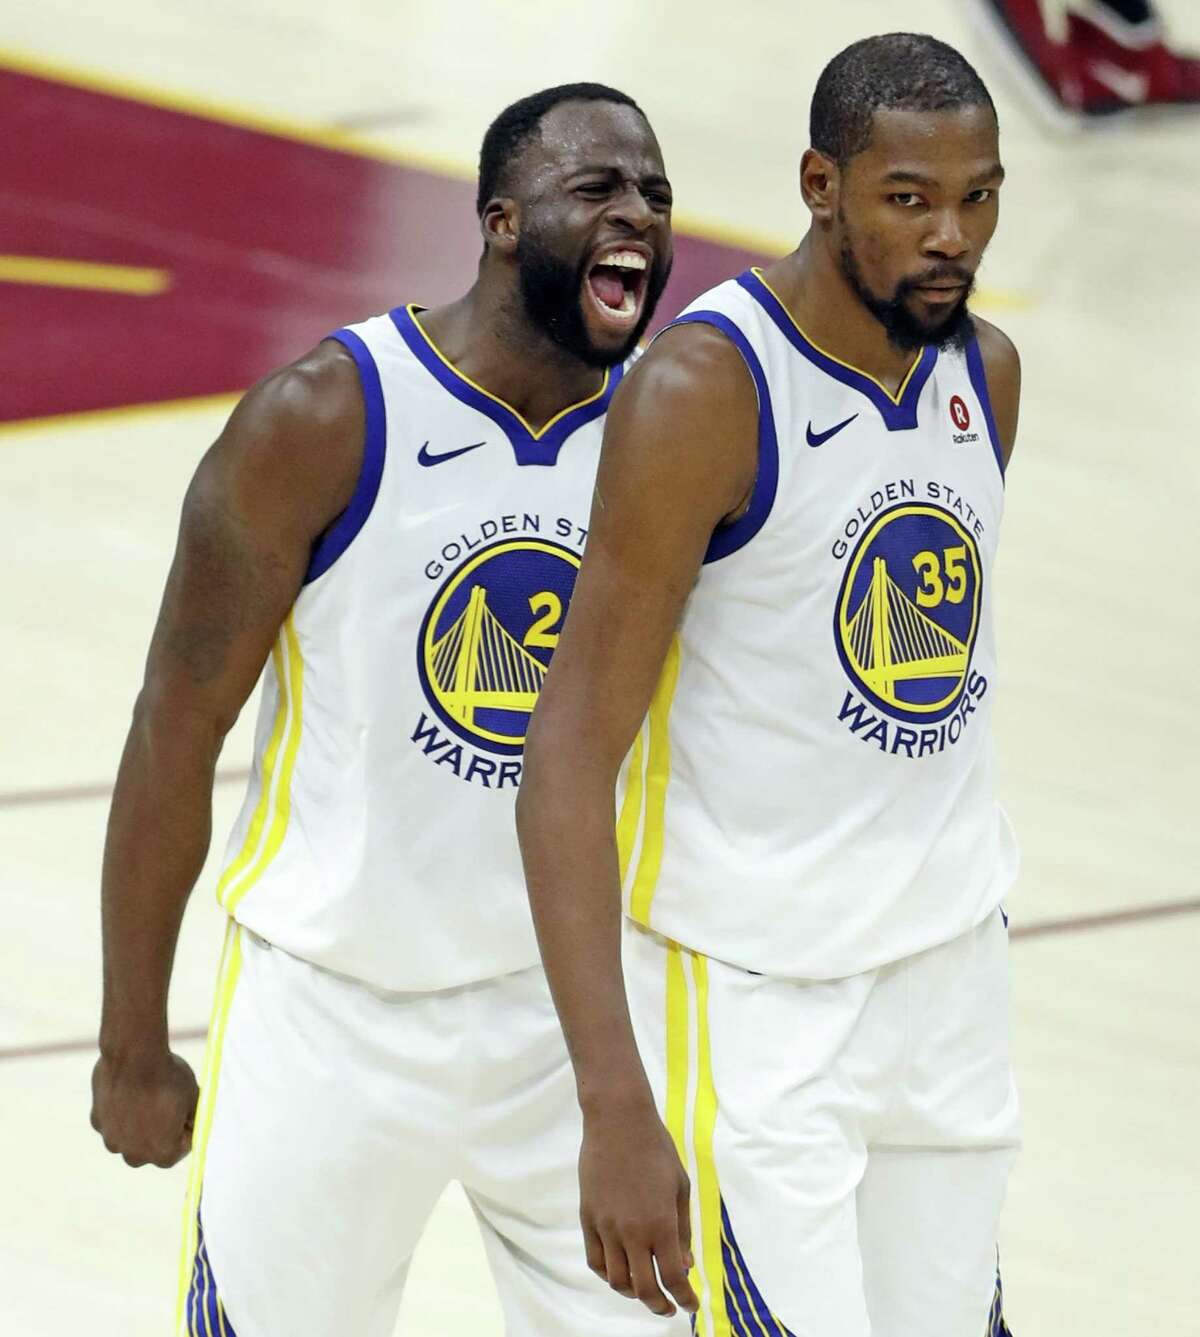 Golden State Warriors' Draymond Green exults after Kevin Durant hit a 3-pointer late in 4th quarter of Warriors' 110-102 win over Cleveland Cavaliers during Game 3 of the NBA Finals at Quicken Loans Arena in Cleveland, Ohio on Wednesday, June 6, 2018.